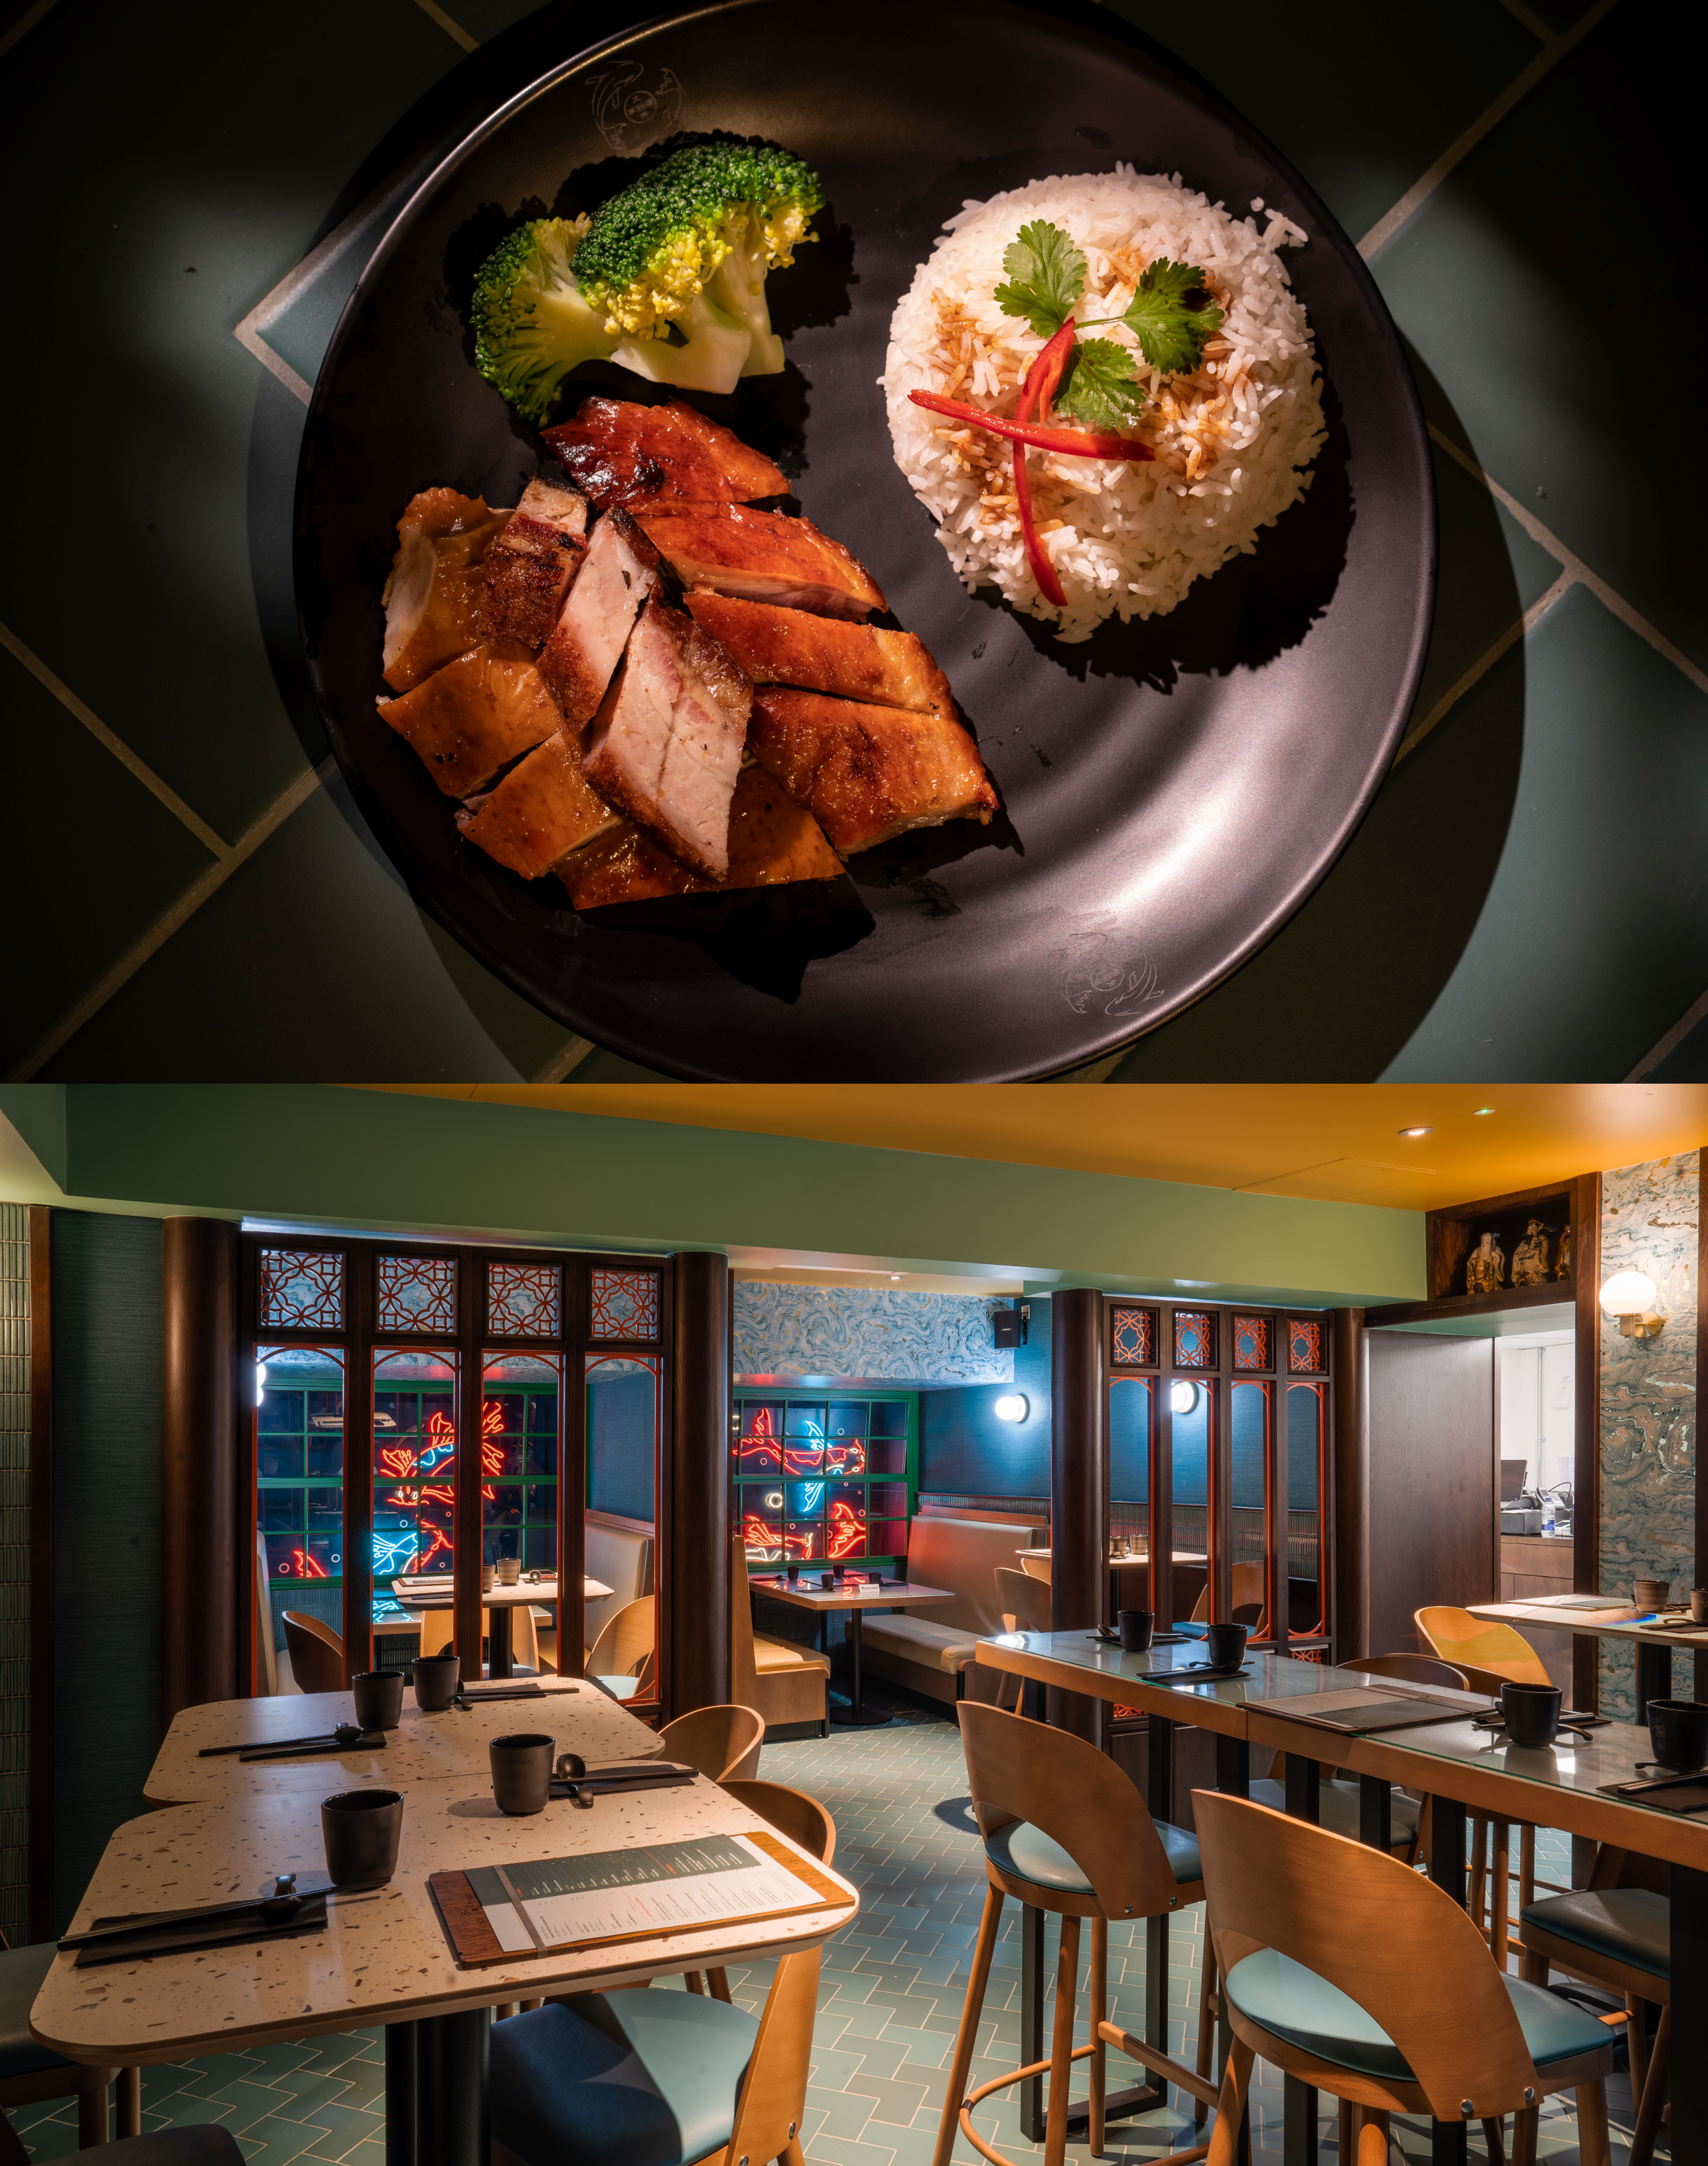 Reward or console yourself post-roulette with some Chinese food at Chop Chop at the Hippodrome Casino